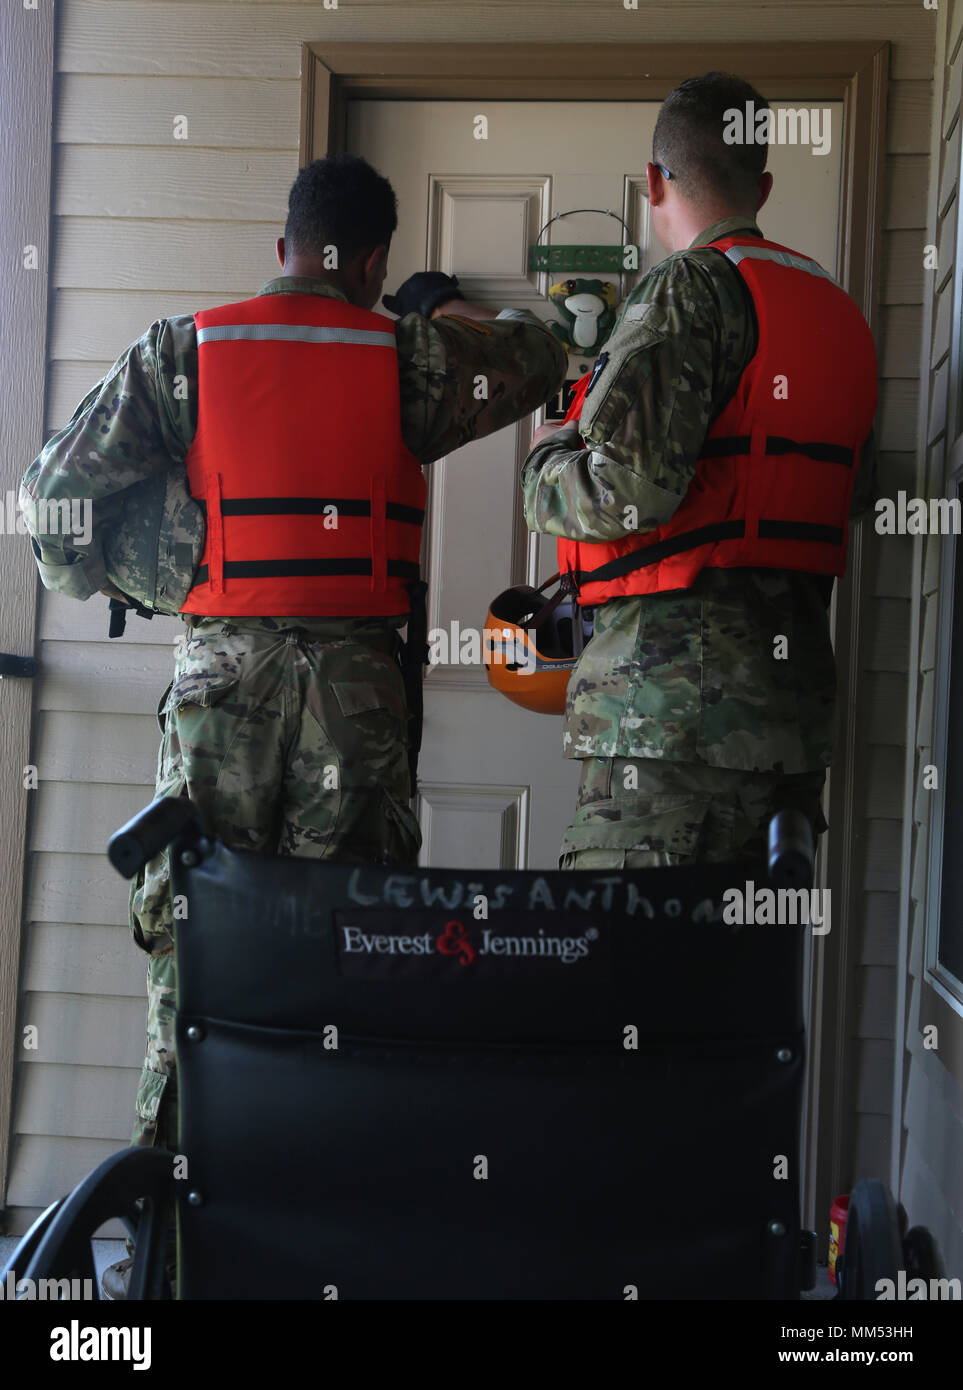 U.S. Army Pvt. Eddie Adams, left, and Spc. James Zuehlke, right, Cavalry Scouts, assigned to 1-124 Cavalry of the Texas National Guard, knock on someone's door during a health and welfare patrol in Orange, Texas, Sept. 5, 2017. The U.S. Military and relief agencies continue to assist in aiding those affected by Hurricane Harvey.  (U.S. Army photo by Spc. Elizabeth Brown) Stock Photo